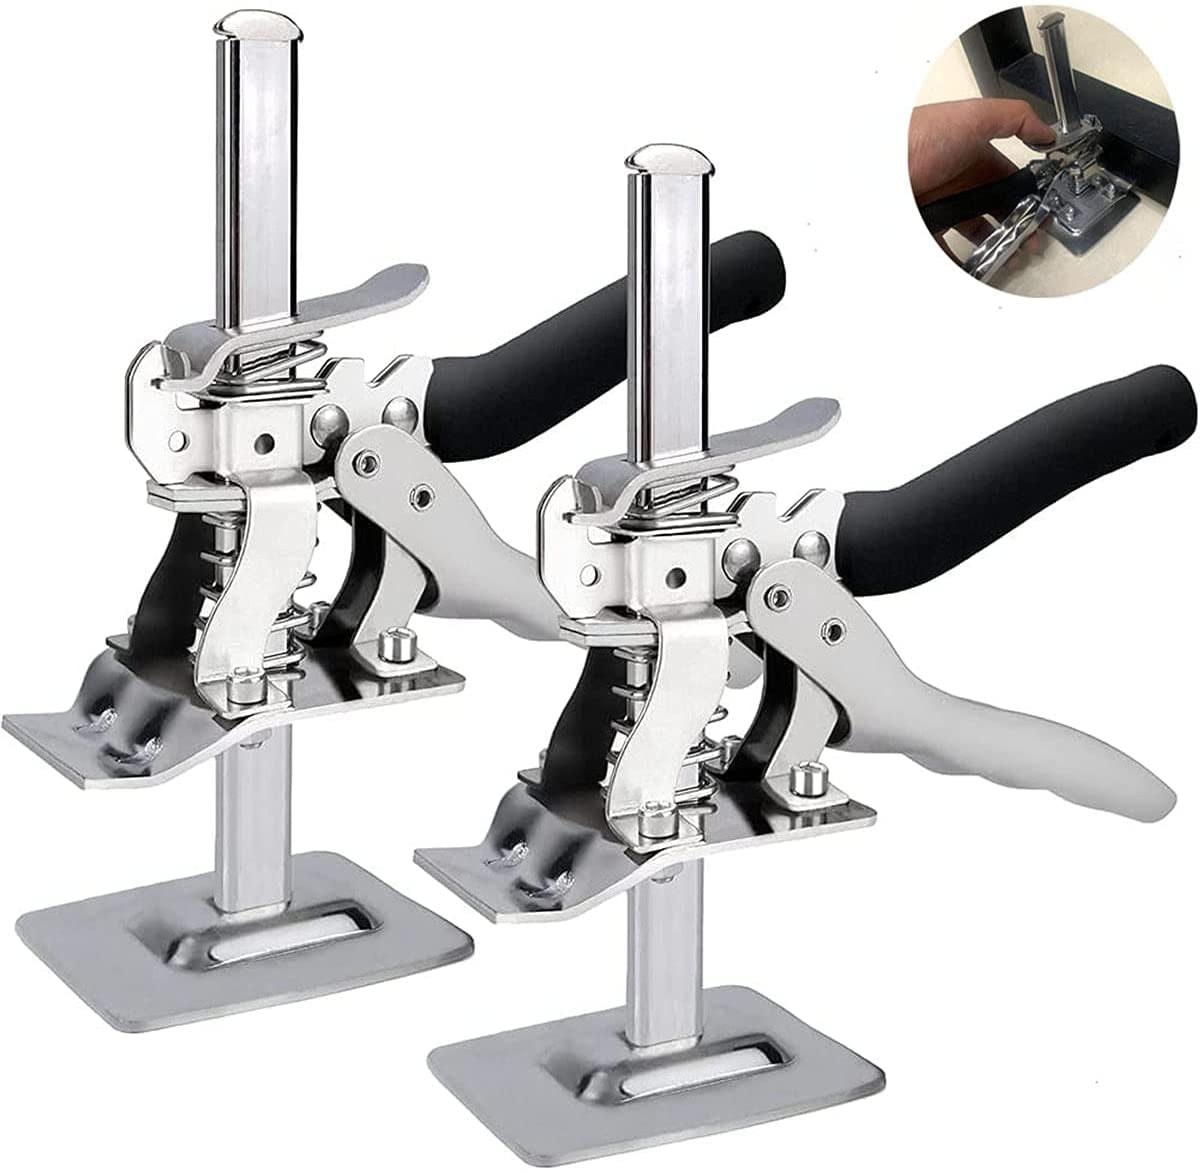 Plate Drywall Alloy Control Installation Tool Arm Hand Tool Jack-labor-saving Arm,2 Pcs Board Lifter Cabinet Jack,Easy to Use Best Gifts for Men 